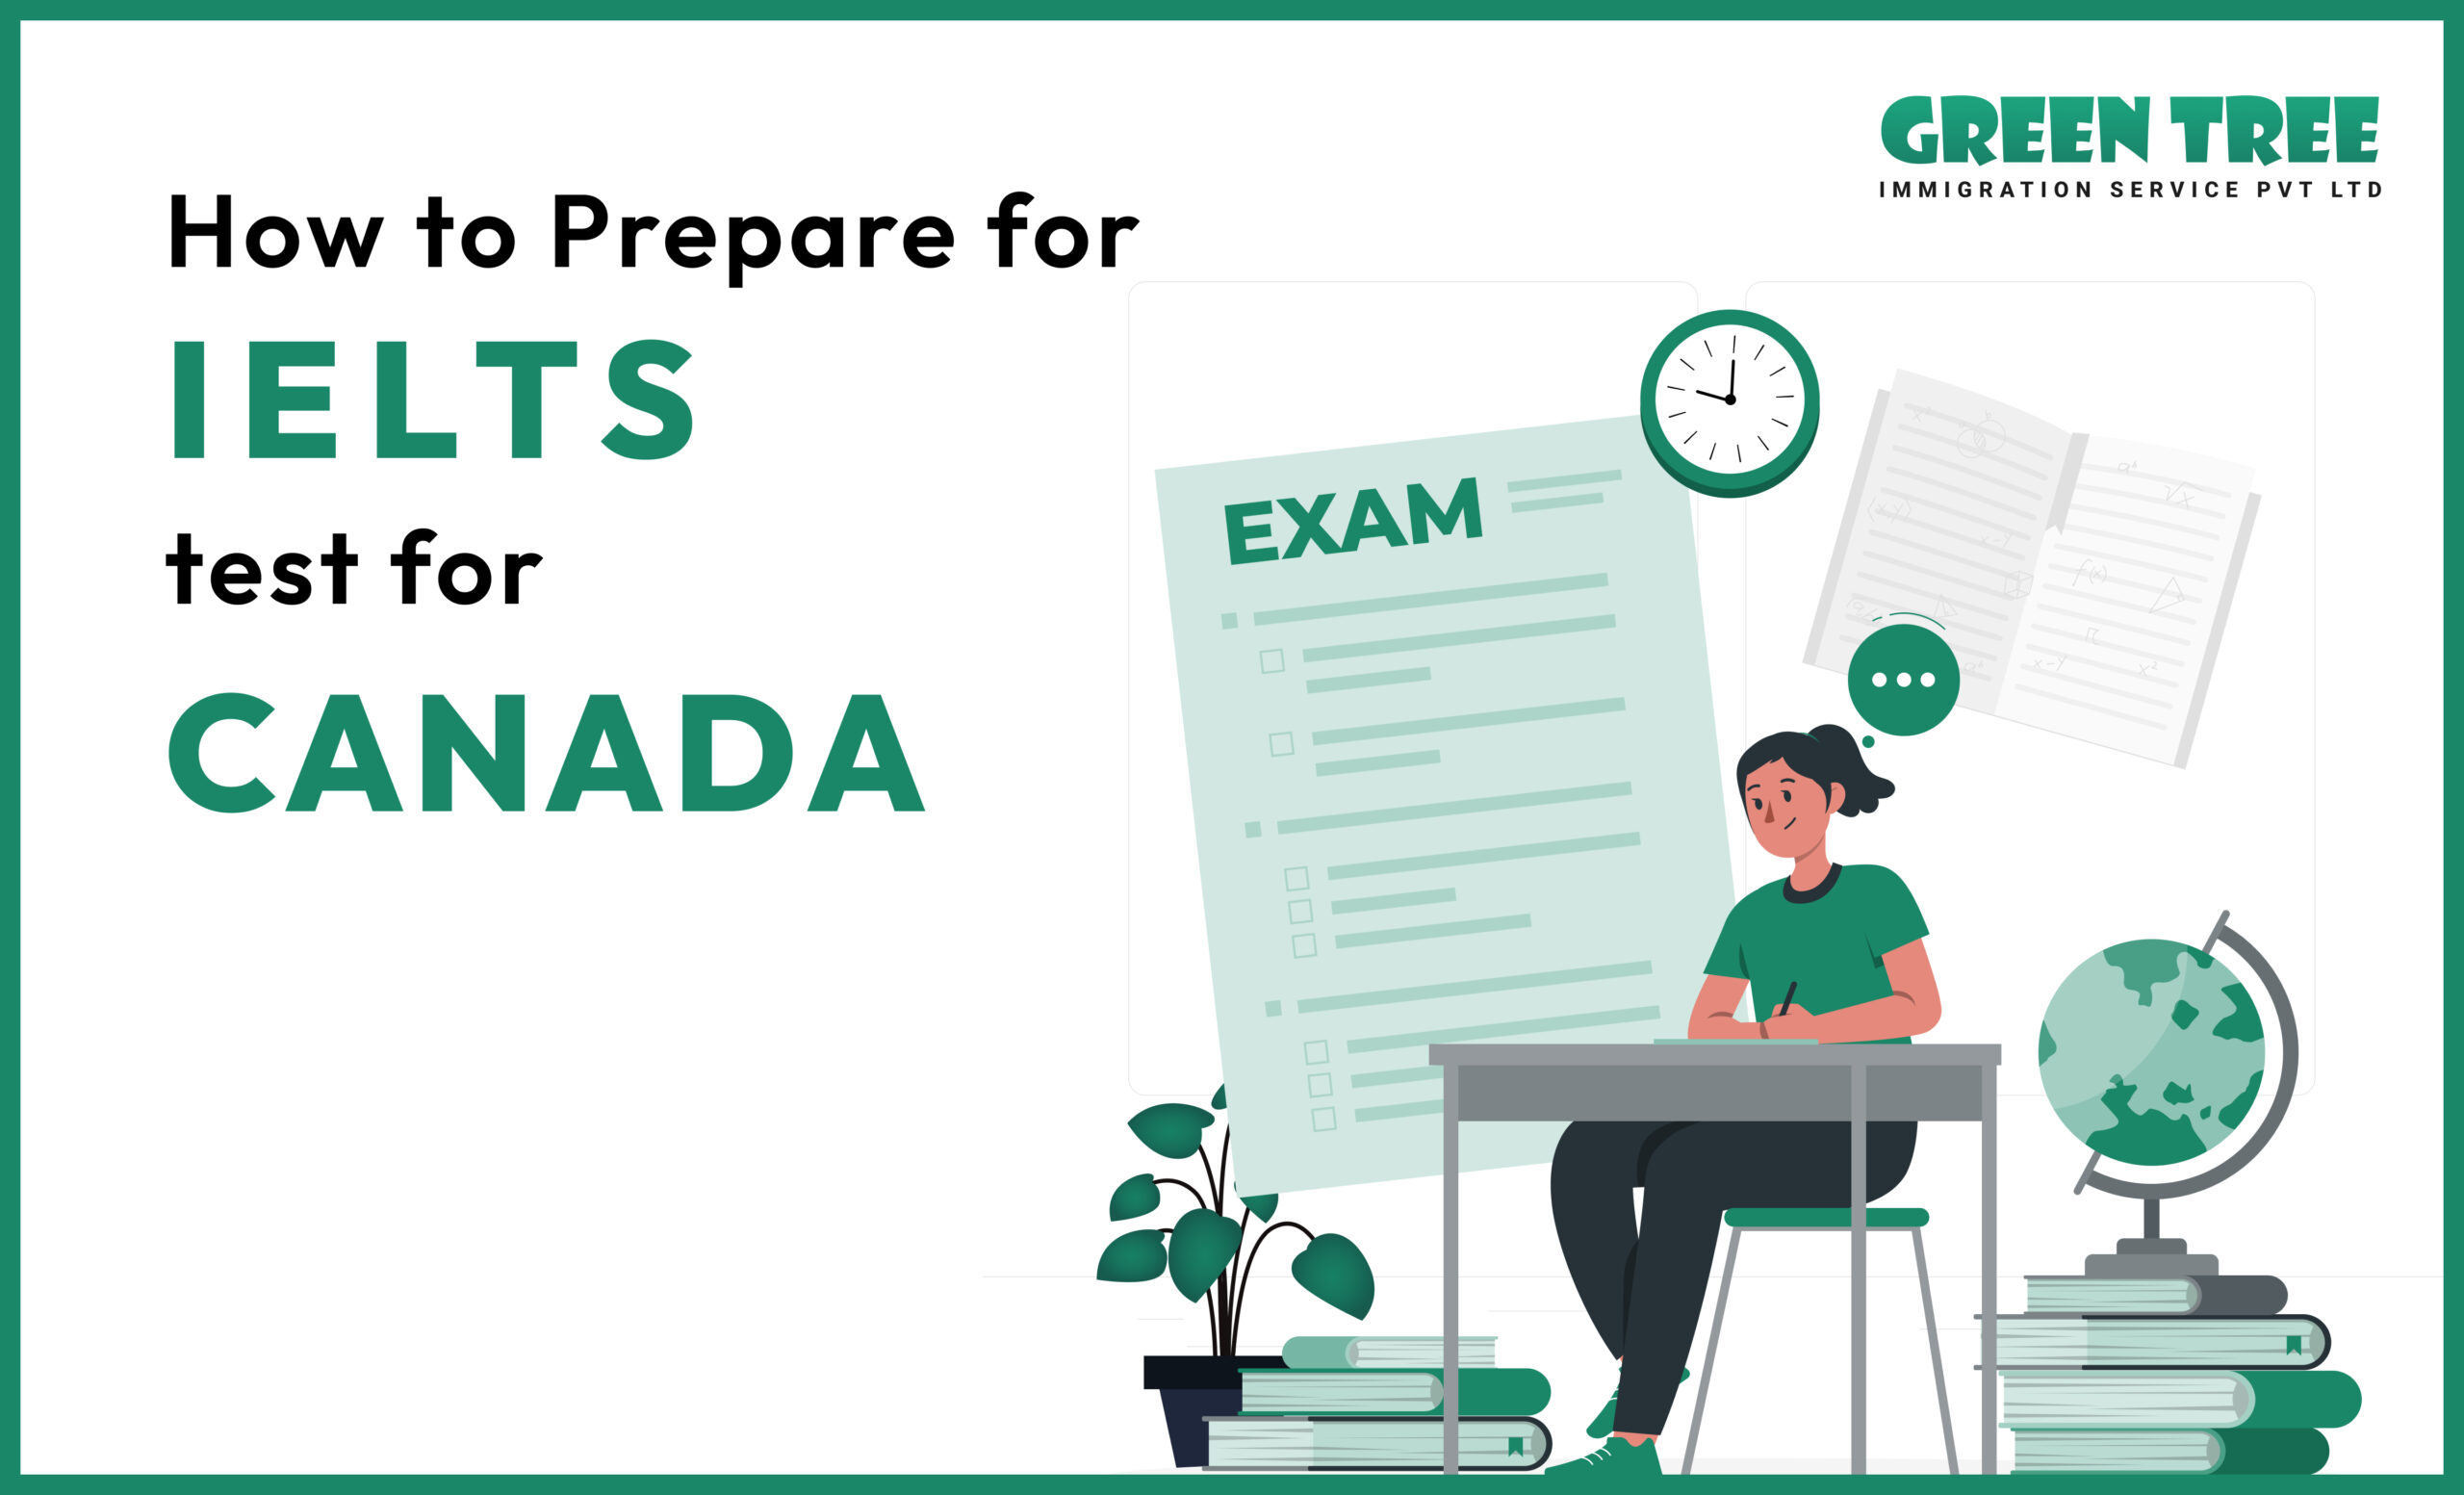 How to Prepare for IELTS test for Canada